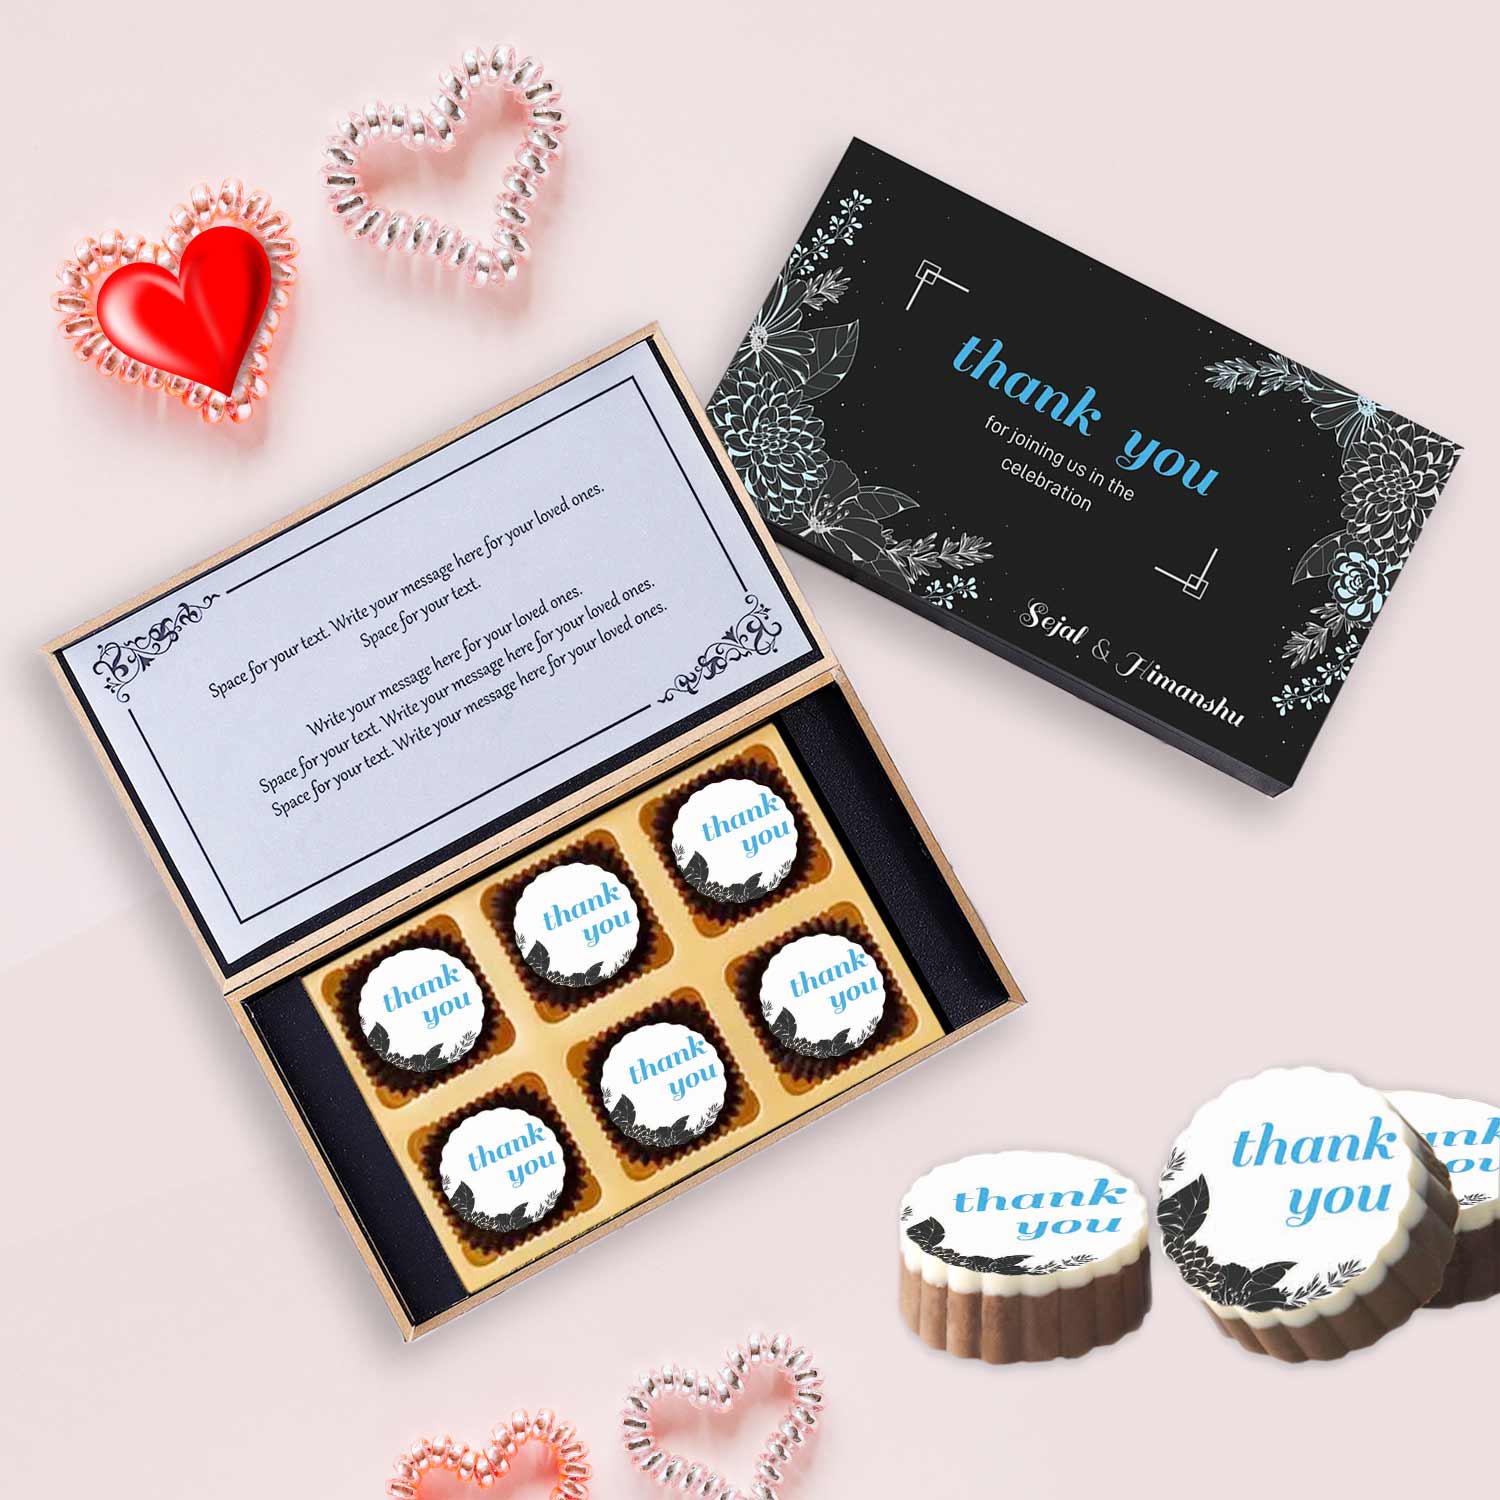 Bride and Groom chocolate covered oreos wedding favor | Gifts From Colorado